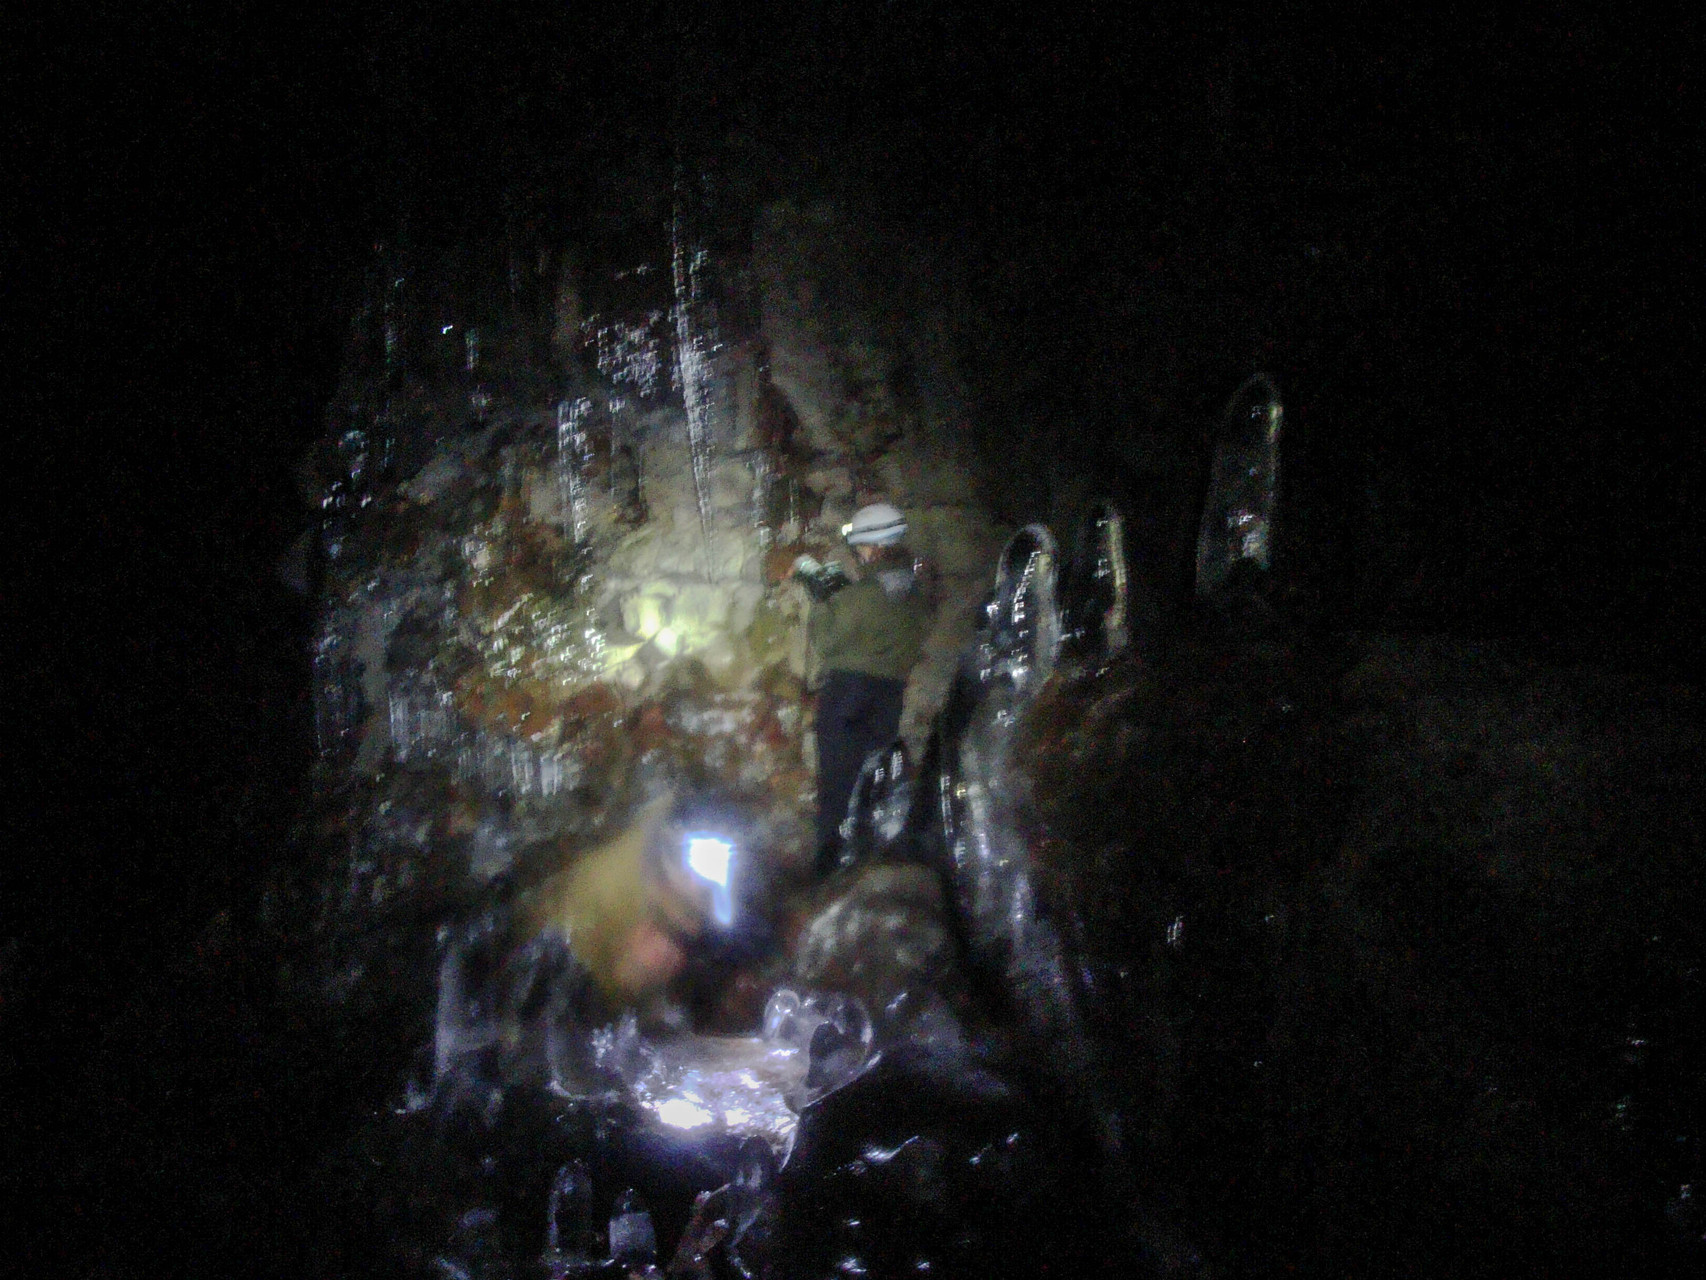 Discovering the ice path through the cave